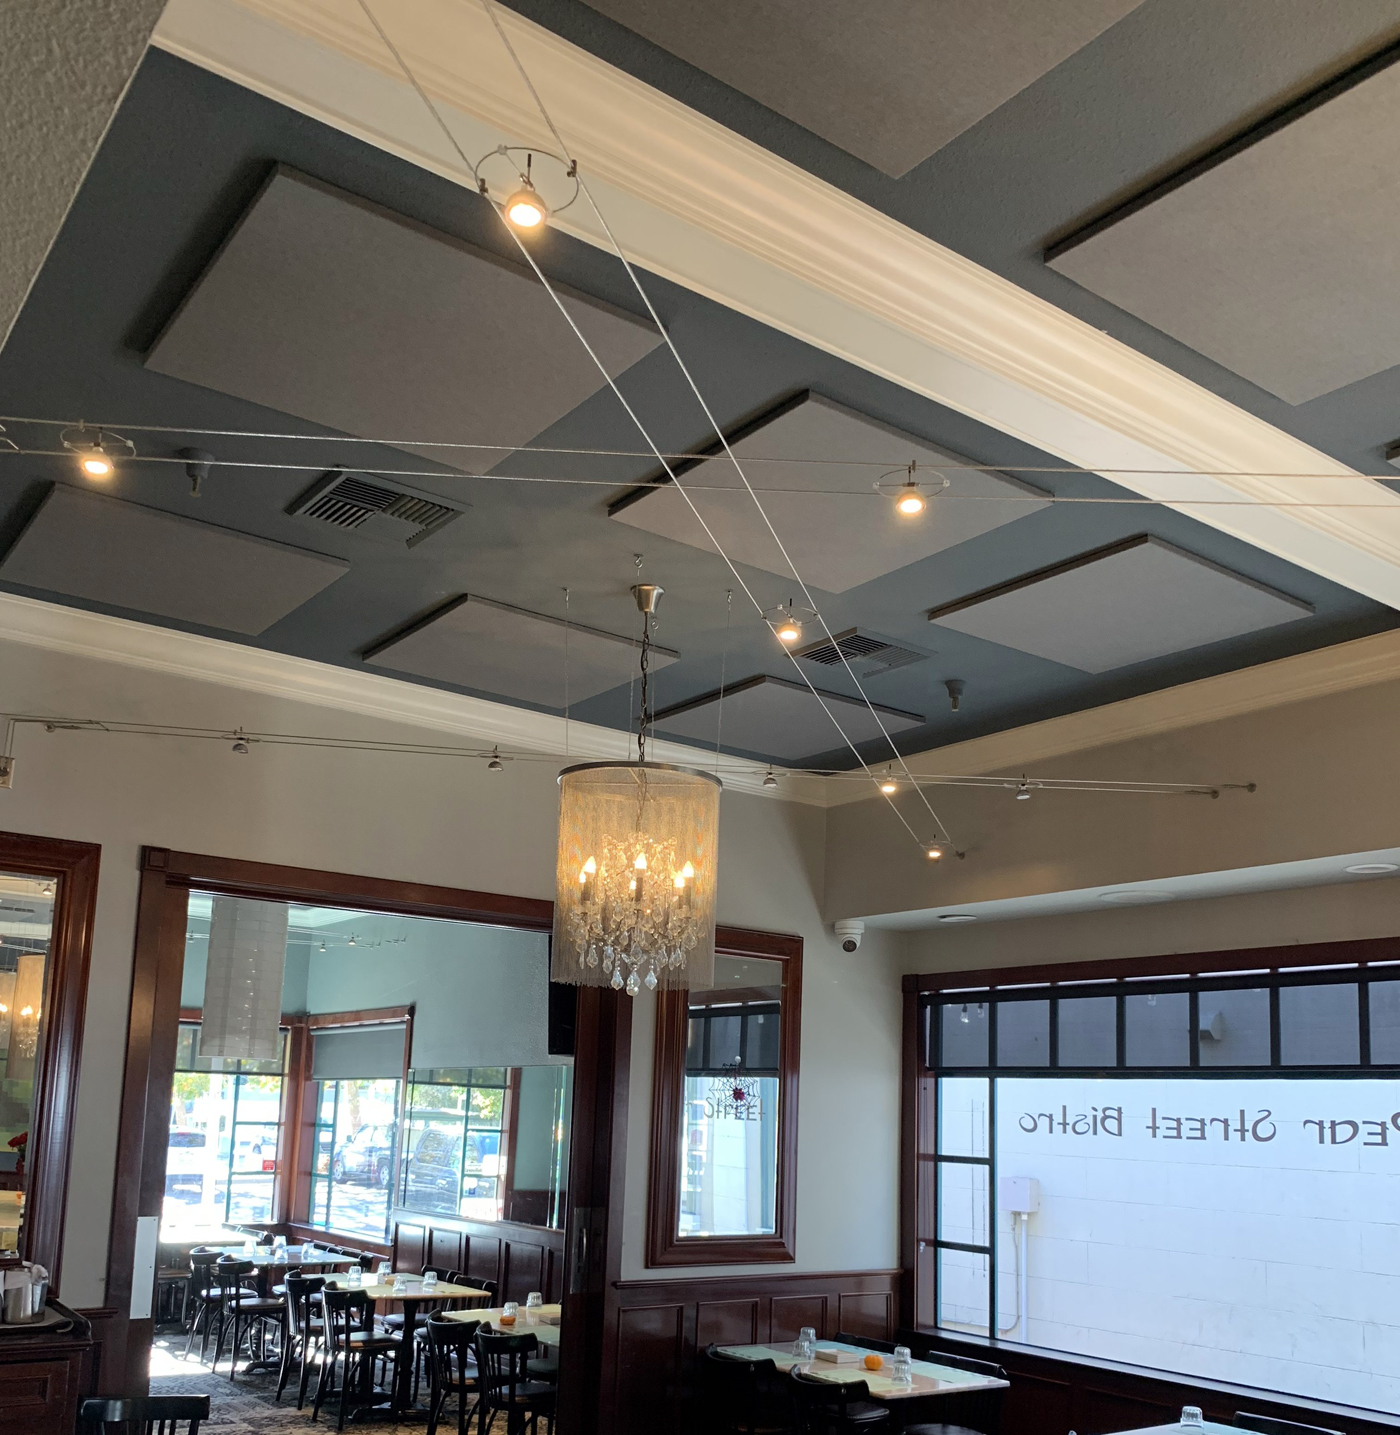 acoustic ceiling mounted sound panels control echo